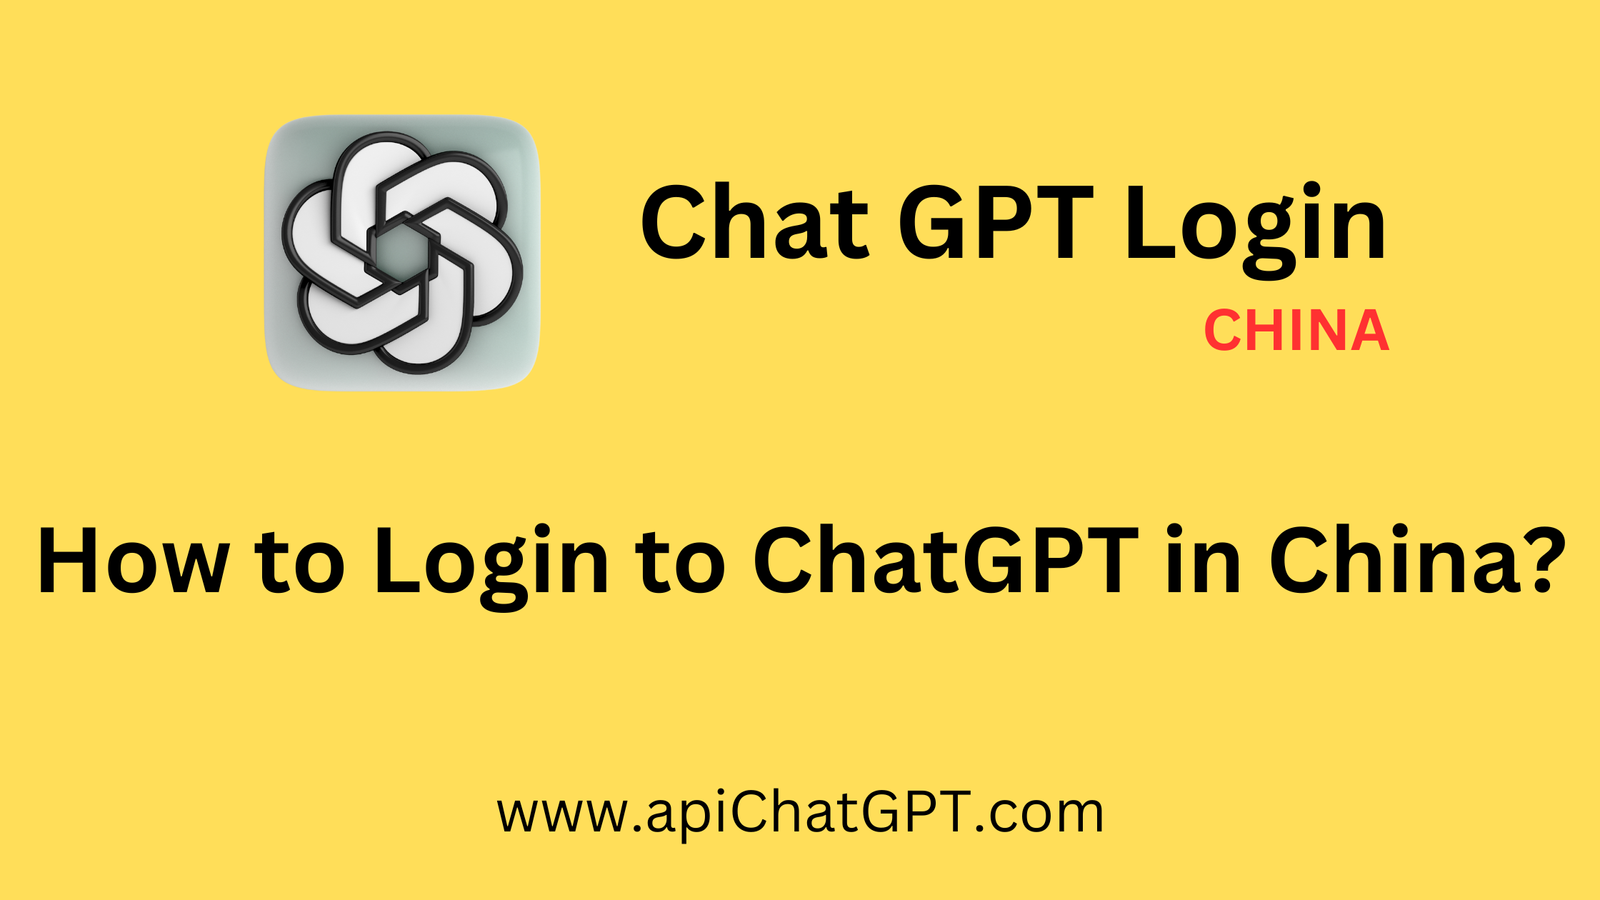 How to Login to ChatGPT in China - Chat GPT Login